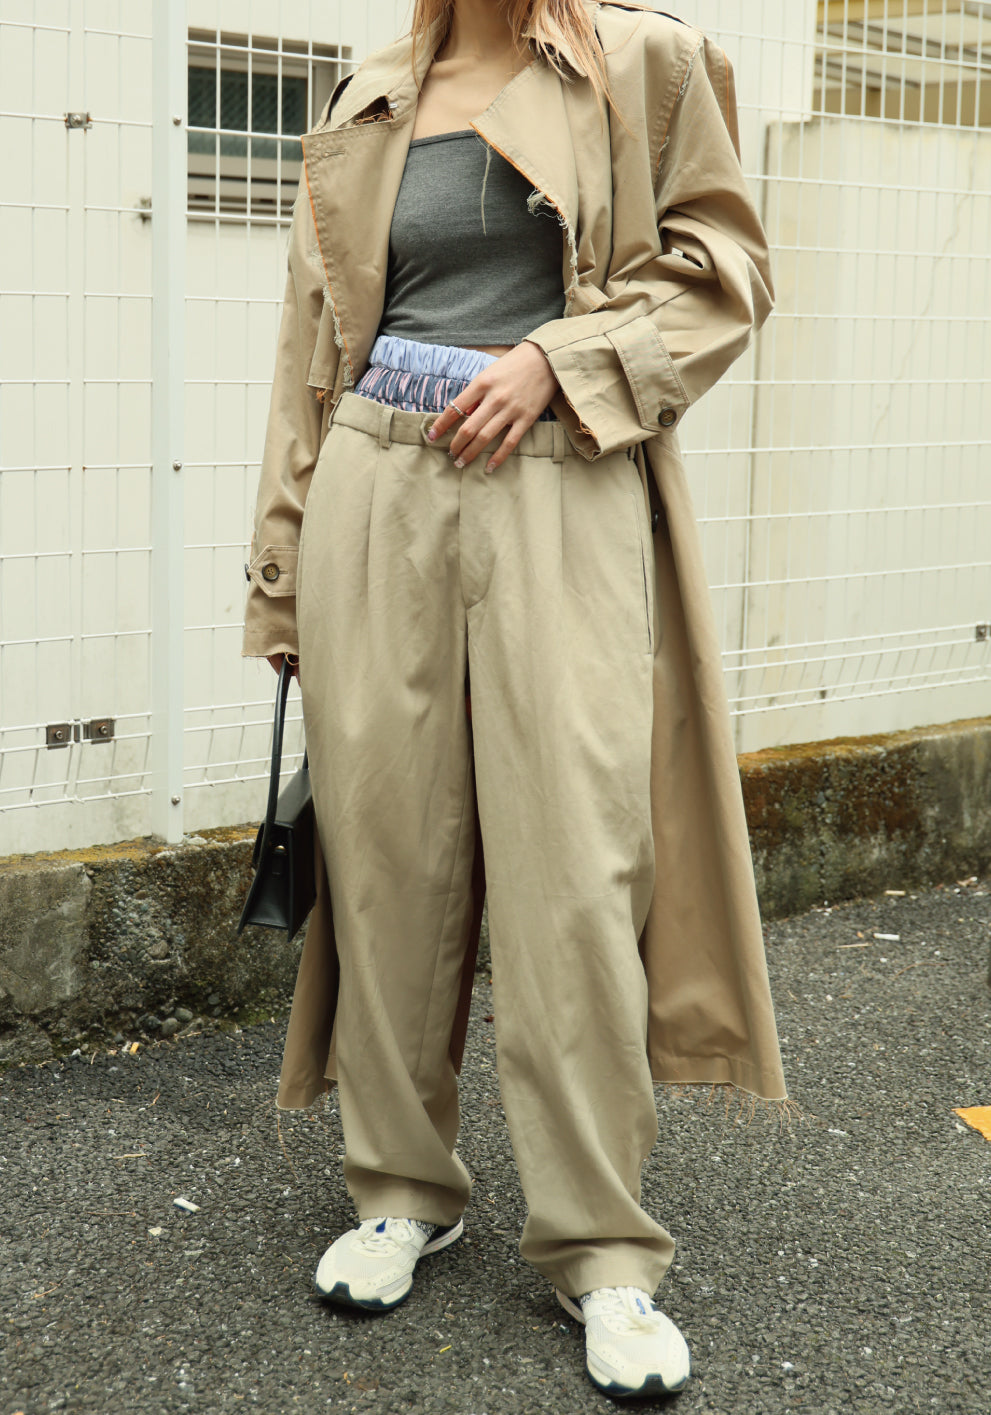 DOUBLE WAIST CHINO PANTS - color "A"